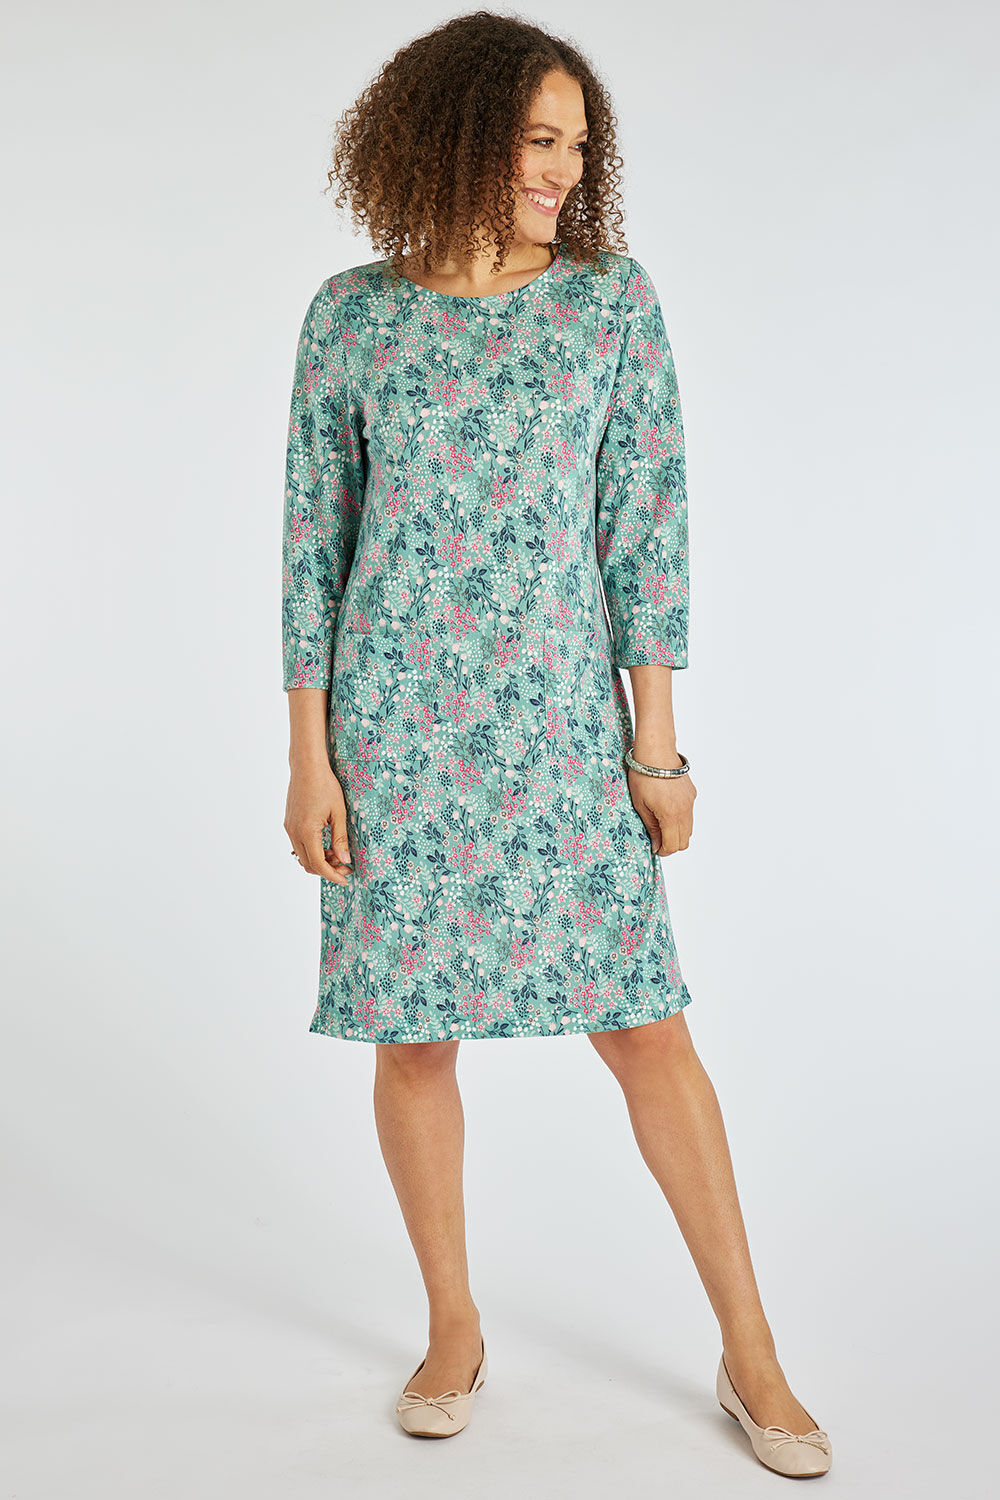 Bonmarche Green Ditsy Floral Print Soft Touch Dress With Pocket Detail, Size: 10